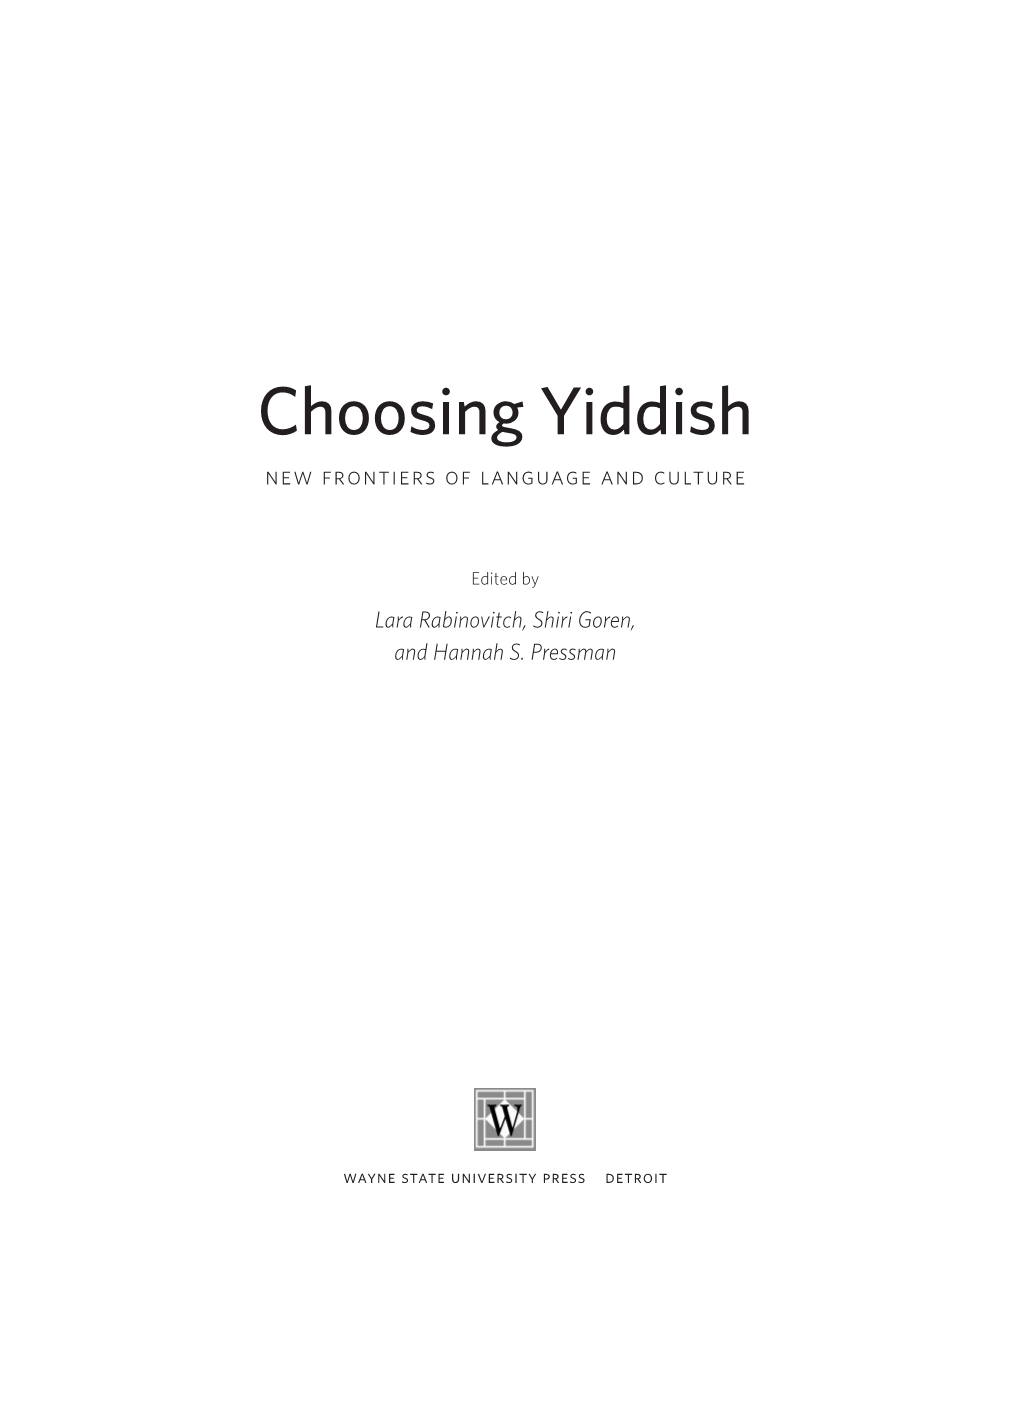 Choosing Yiddish New Frontiers of Language and Culture